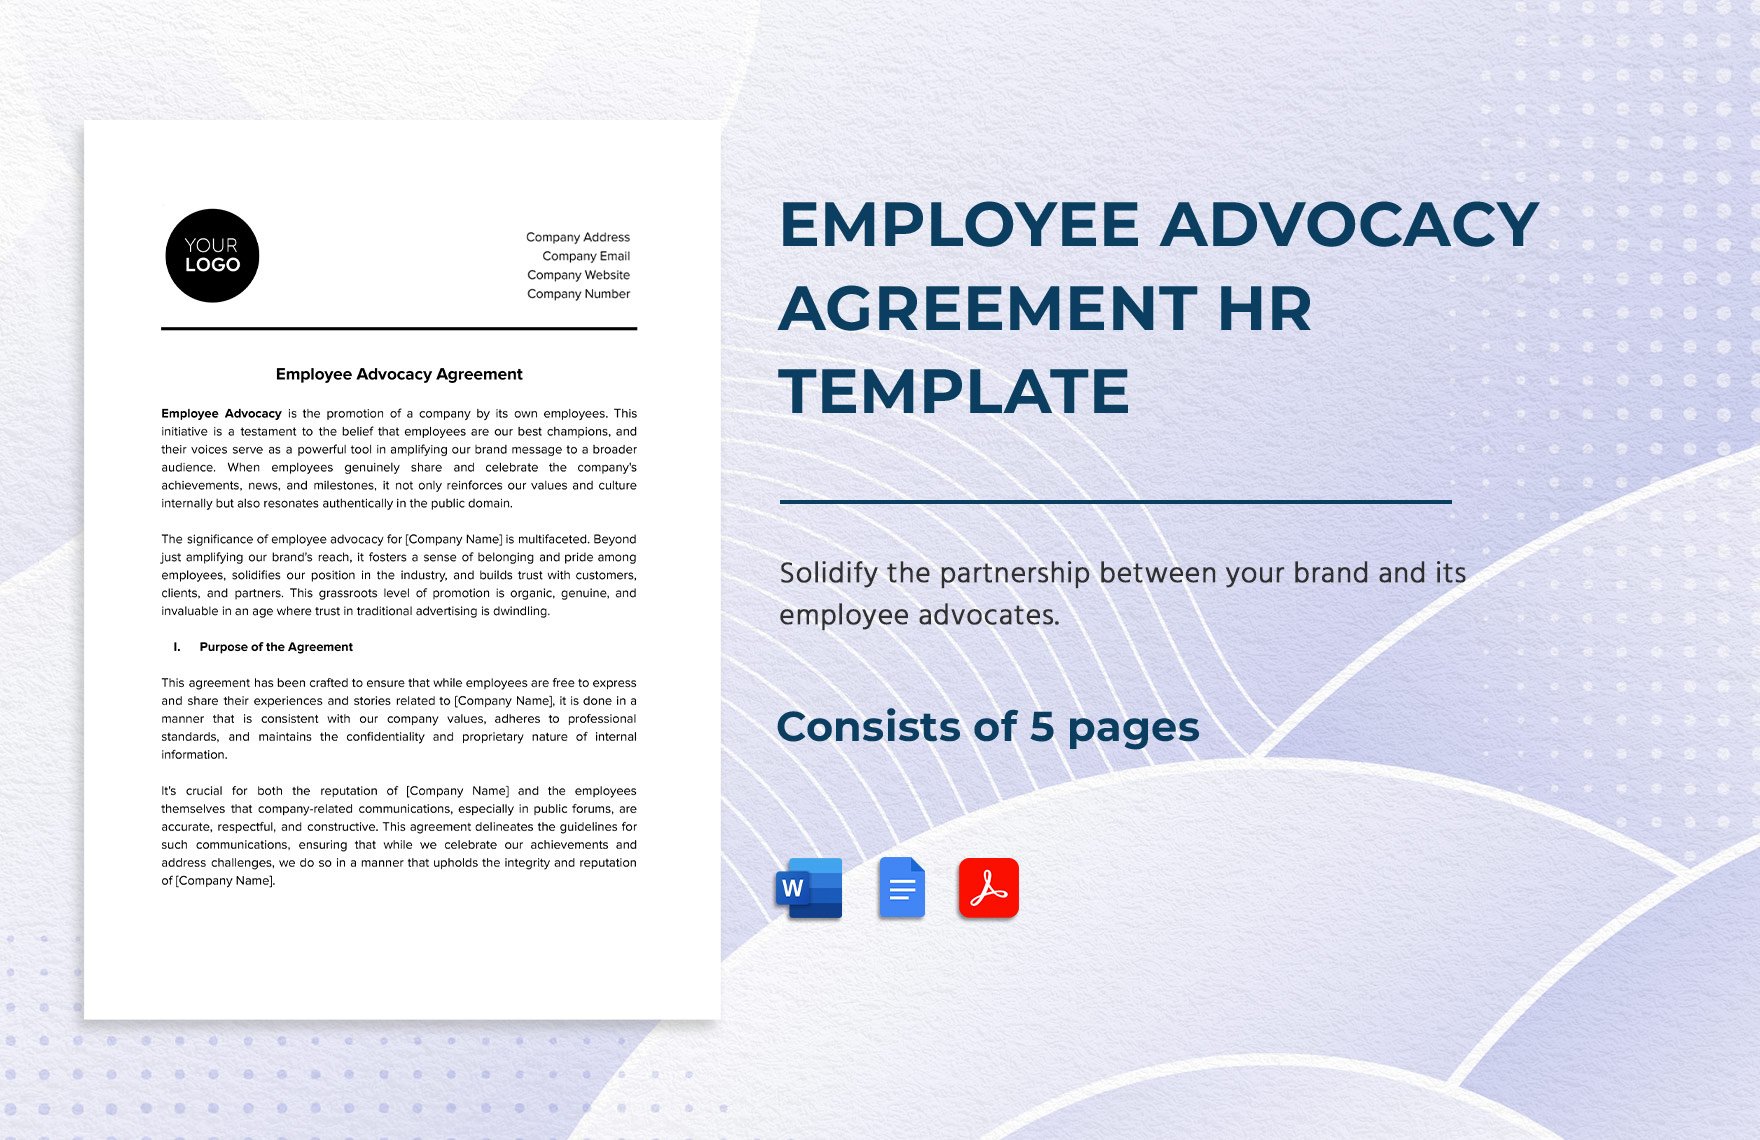 Employee Advocacy Agreement HR Template in Word, Google Docs, PDF